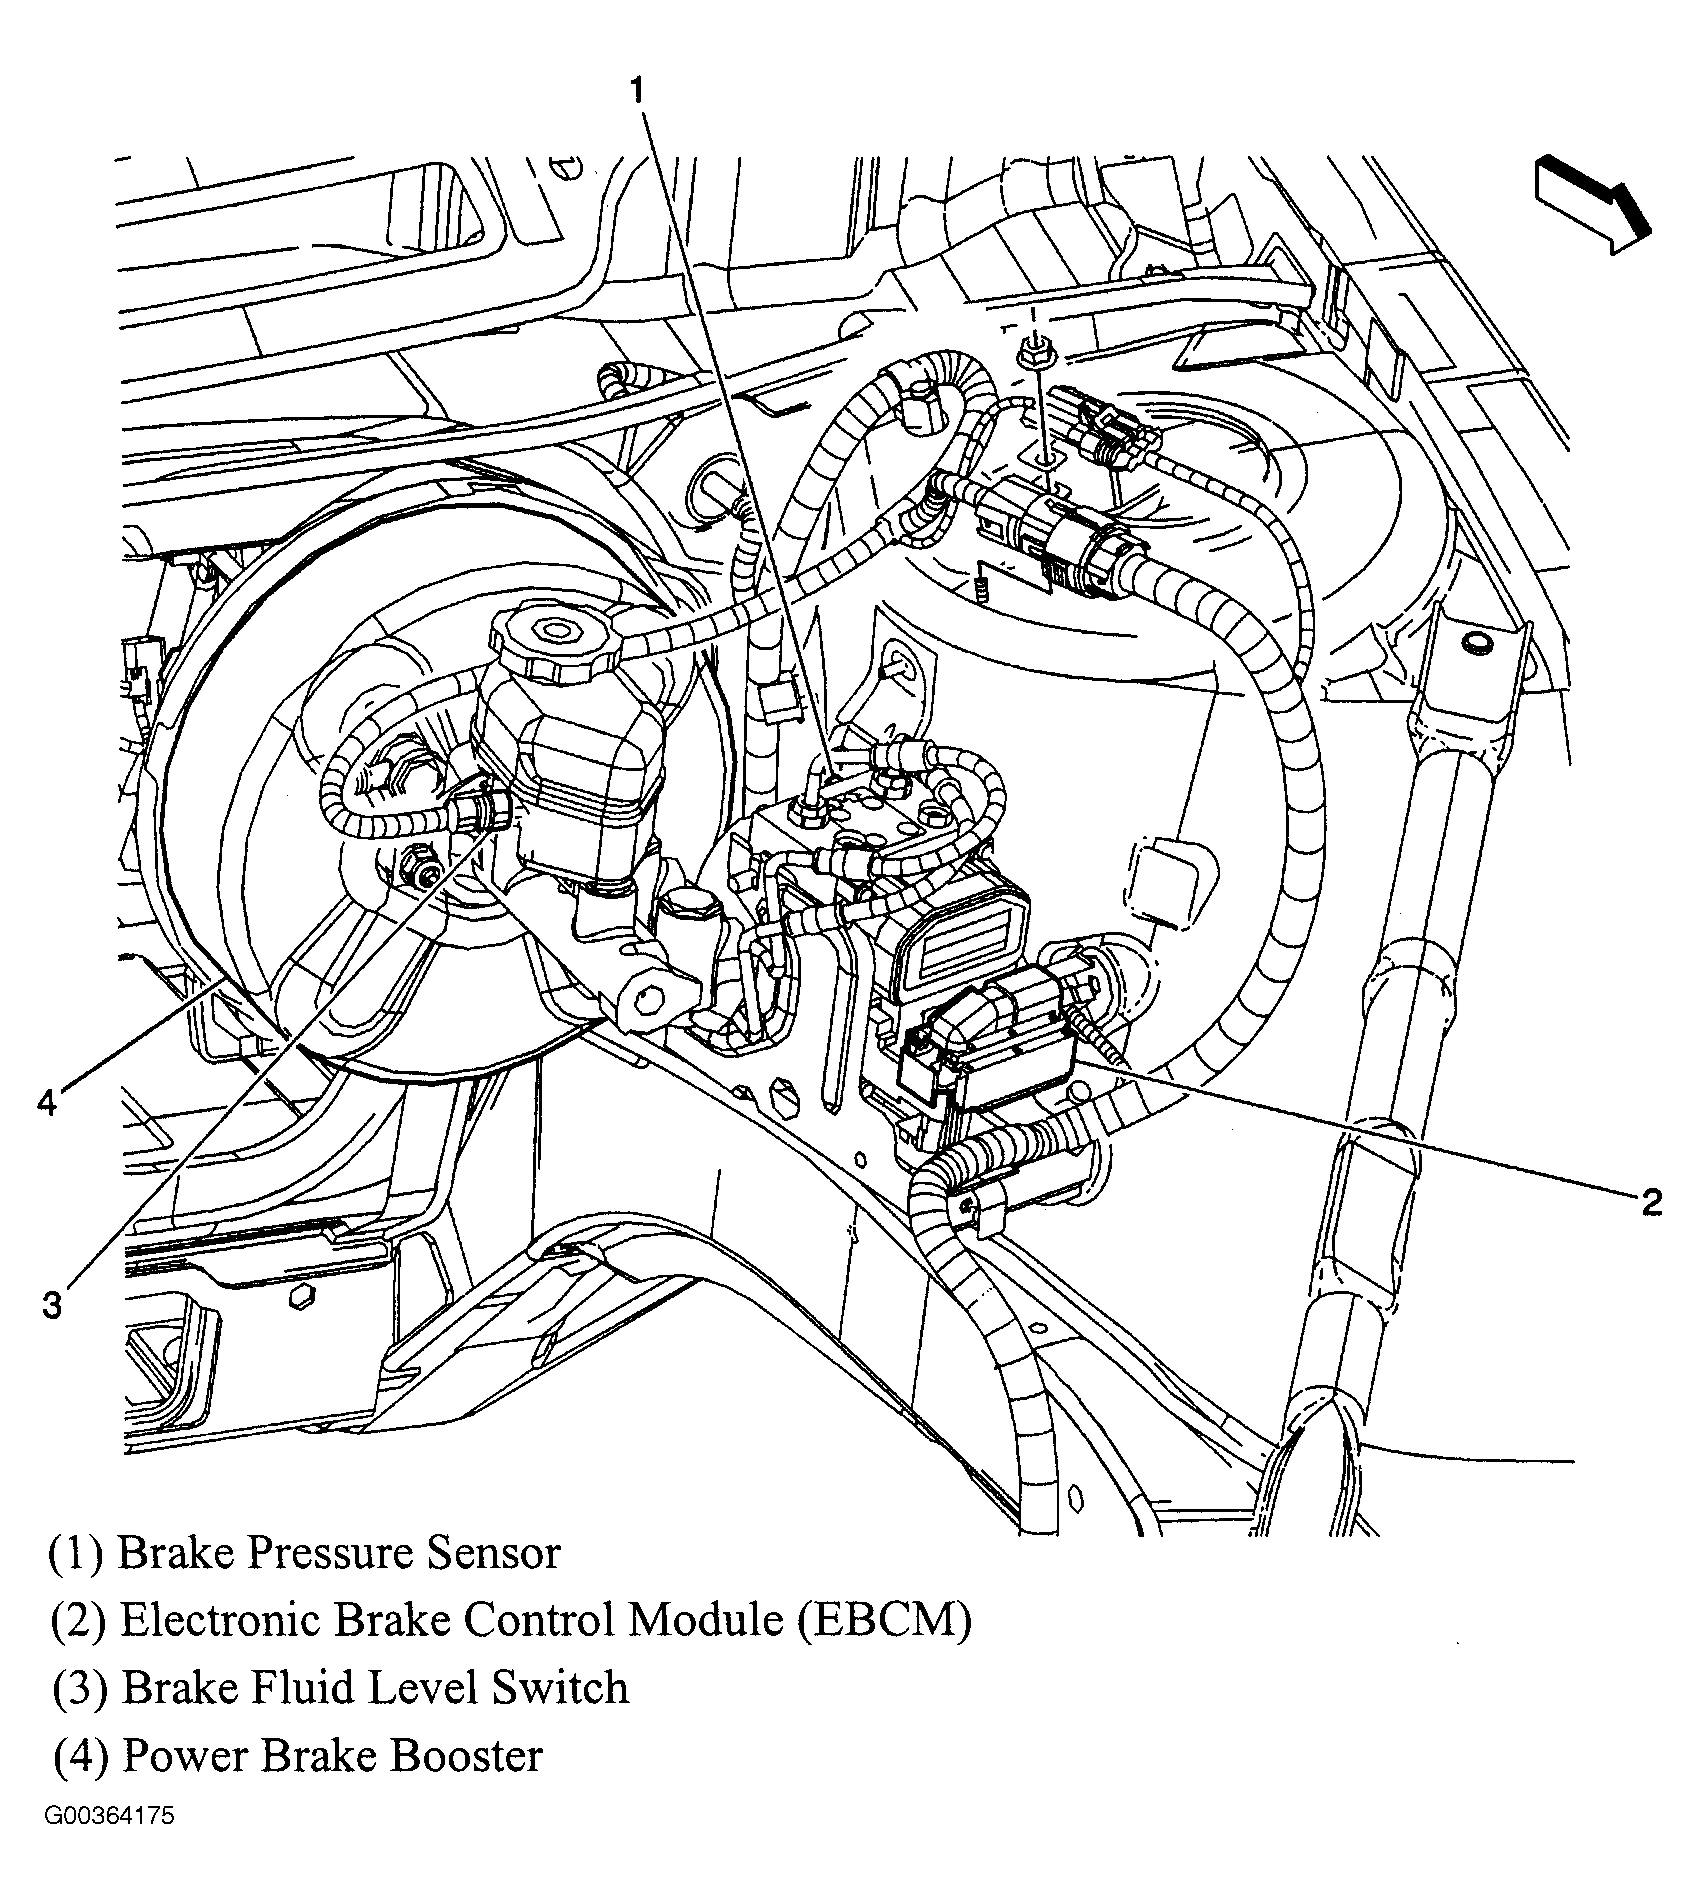 Buick LaCrosse CXL 2007 - Component Locations -  Left Rear Of Engine Compartment